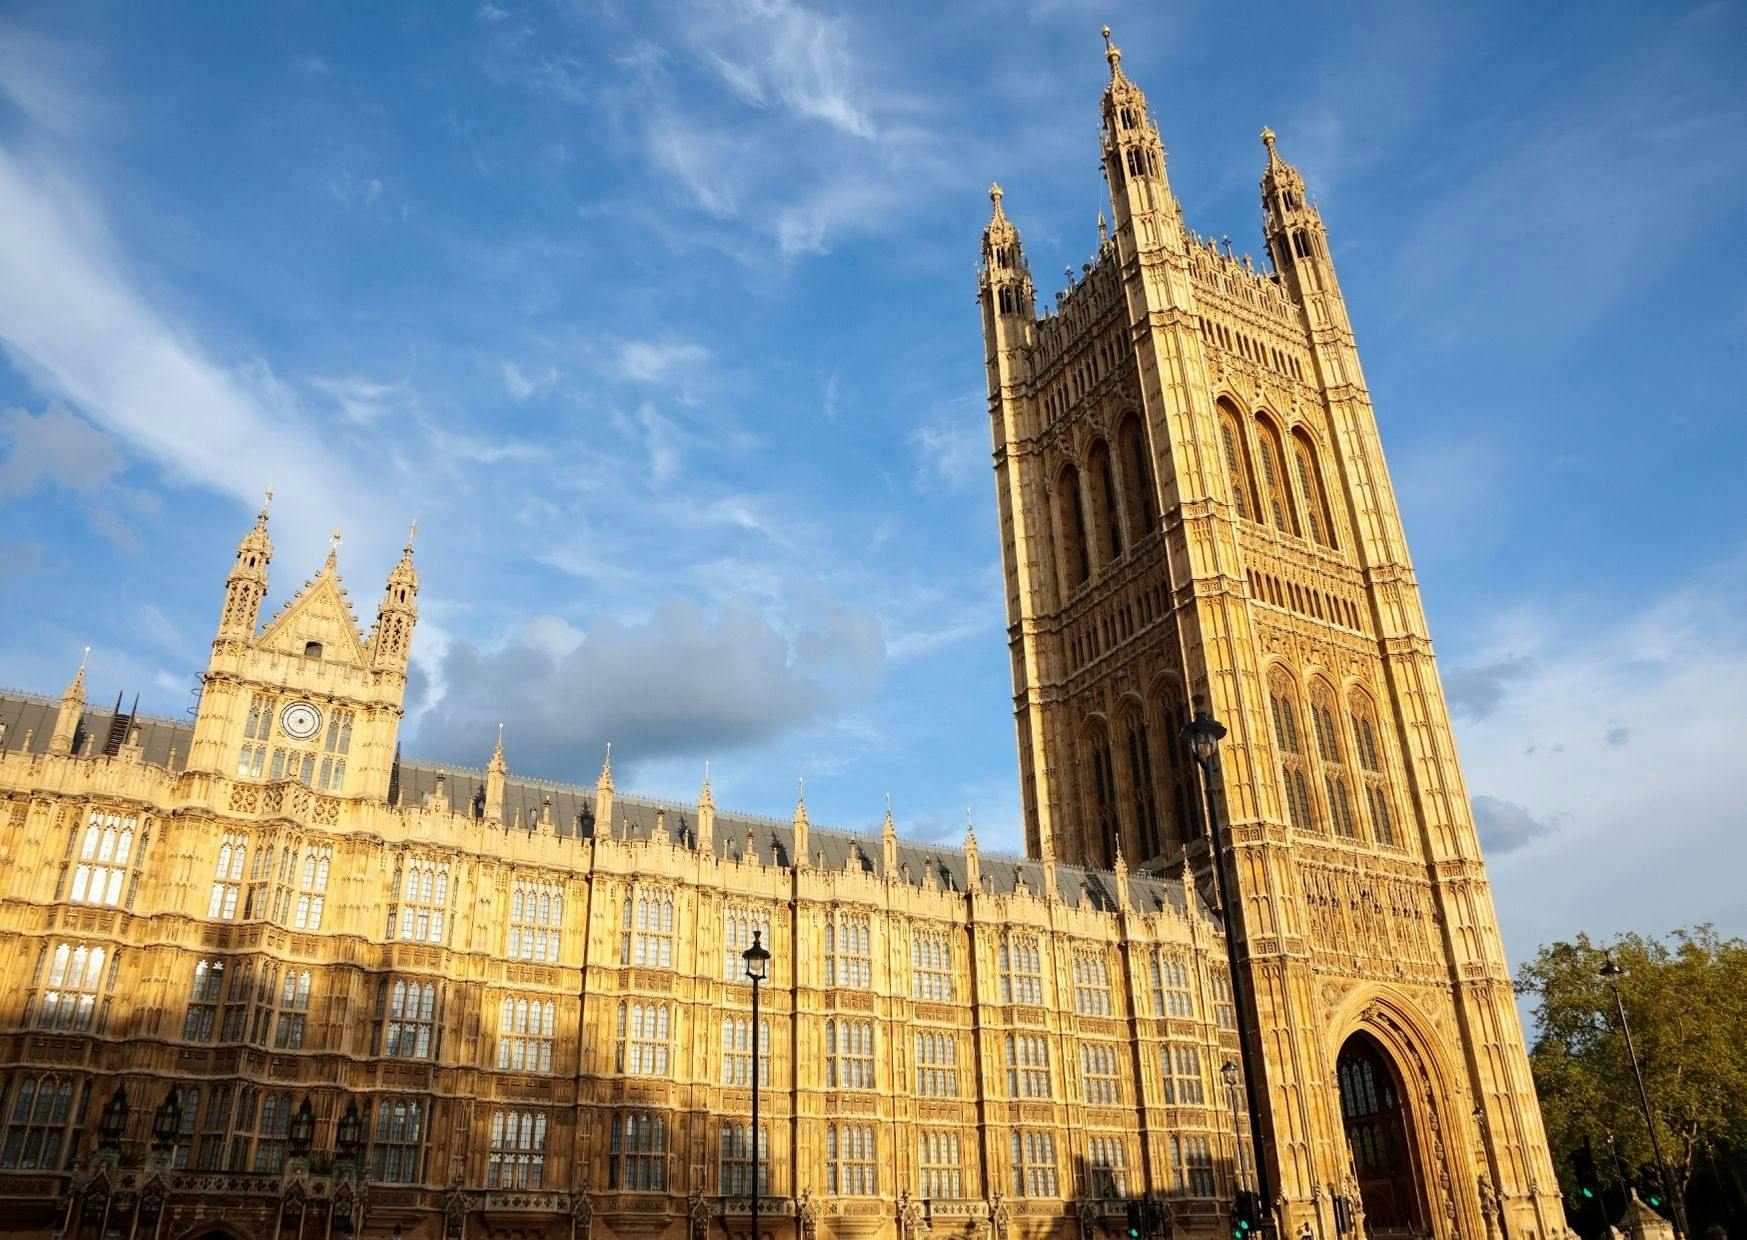 Stock Image of the House of Lords